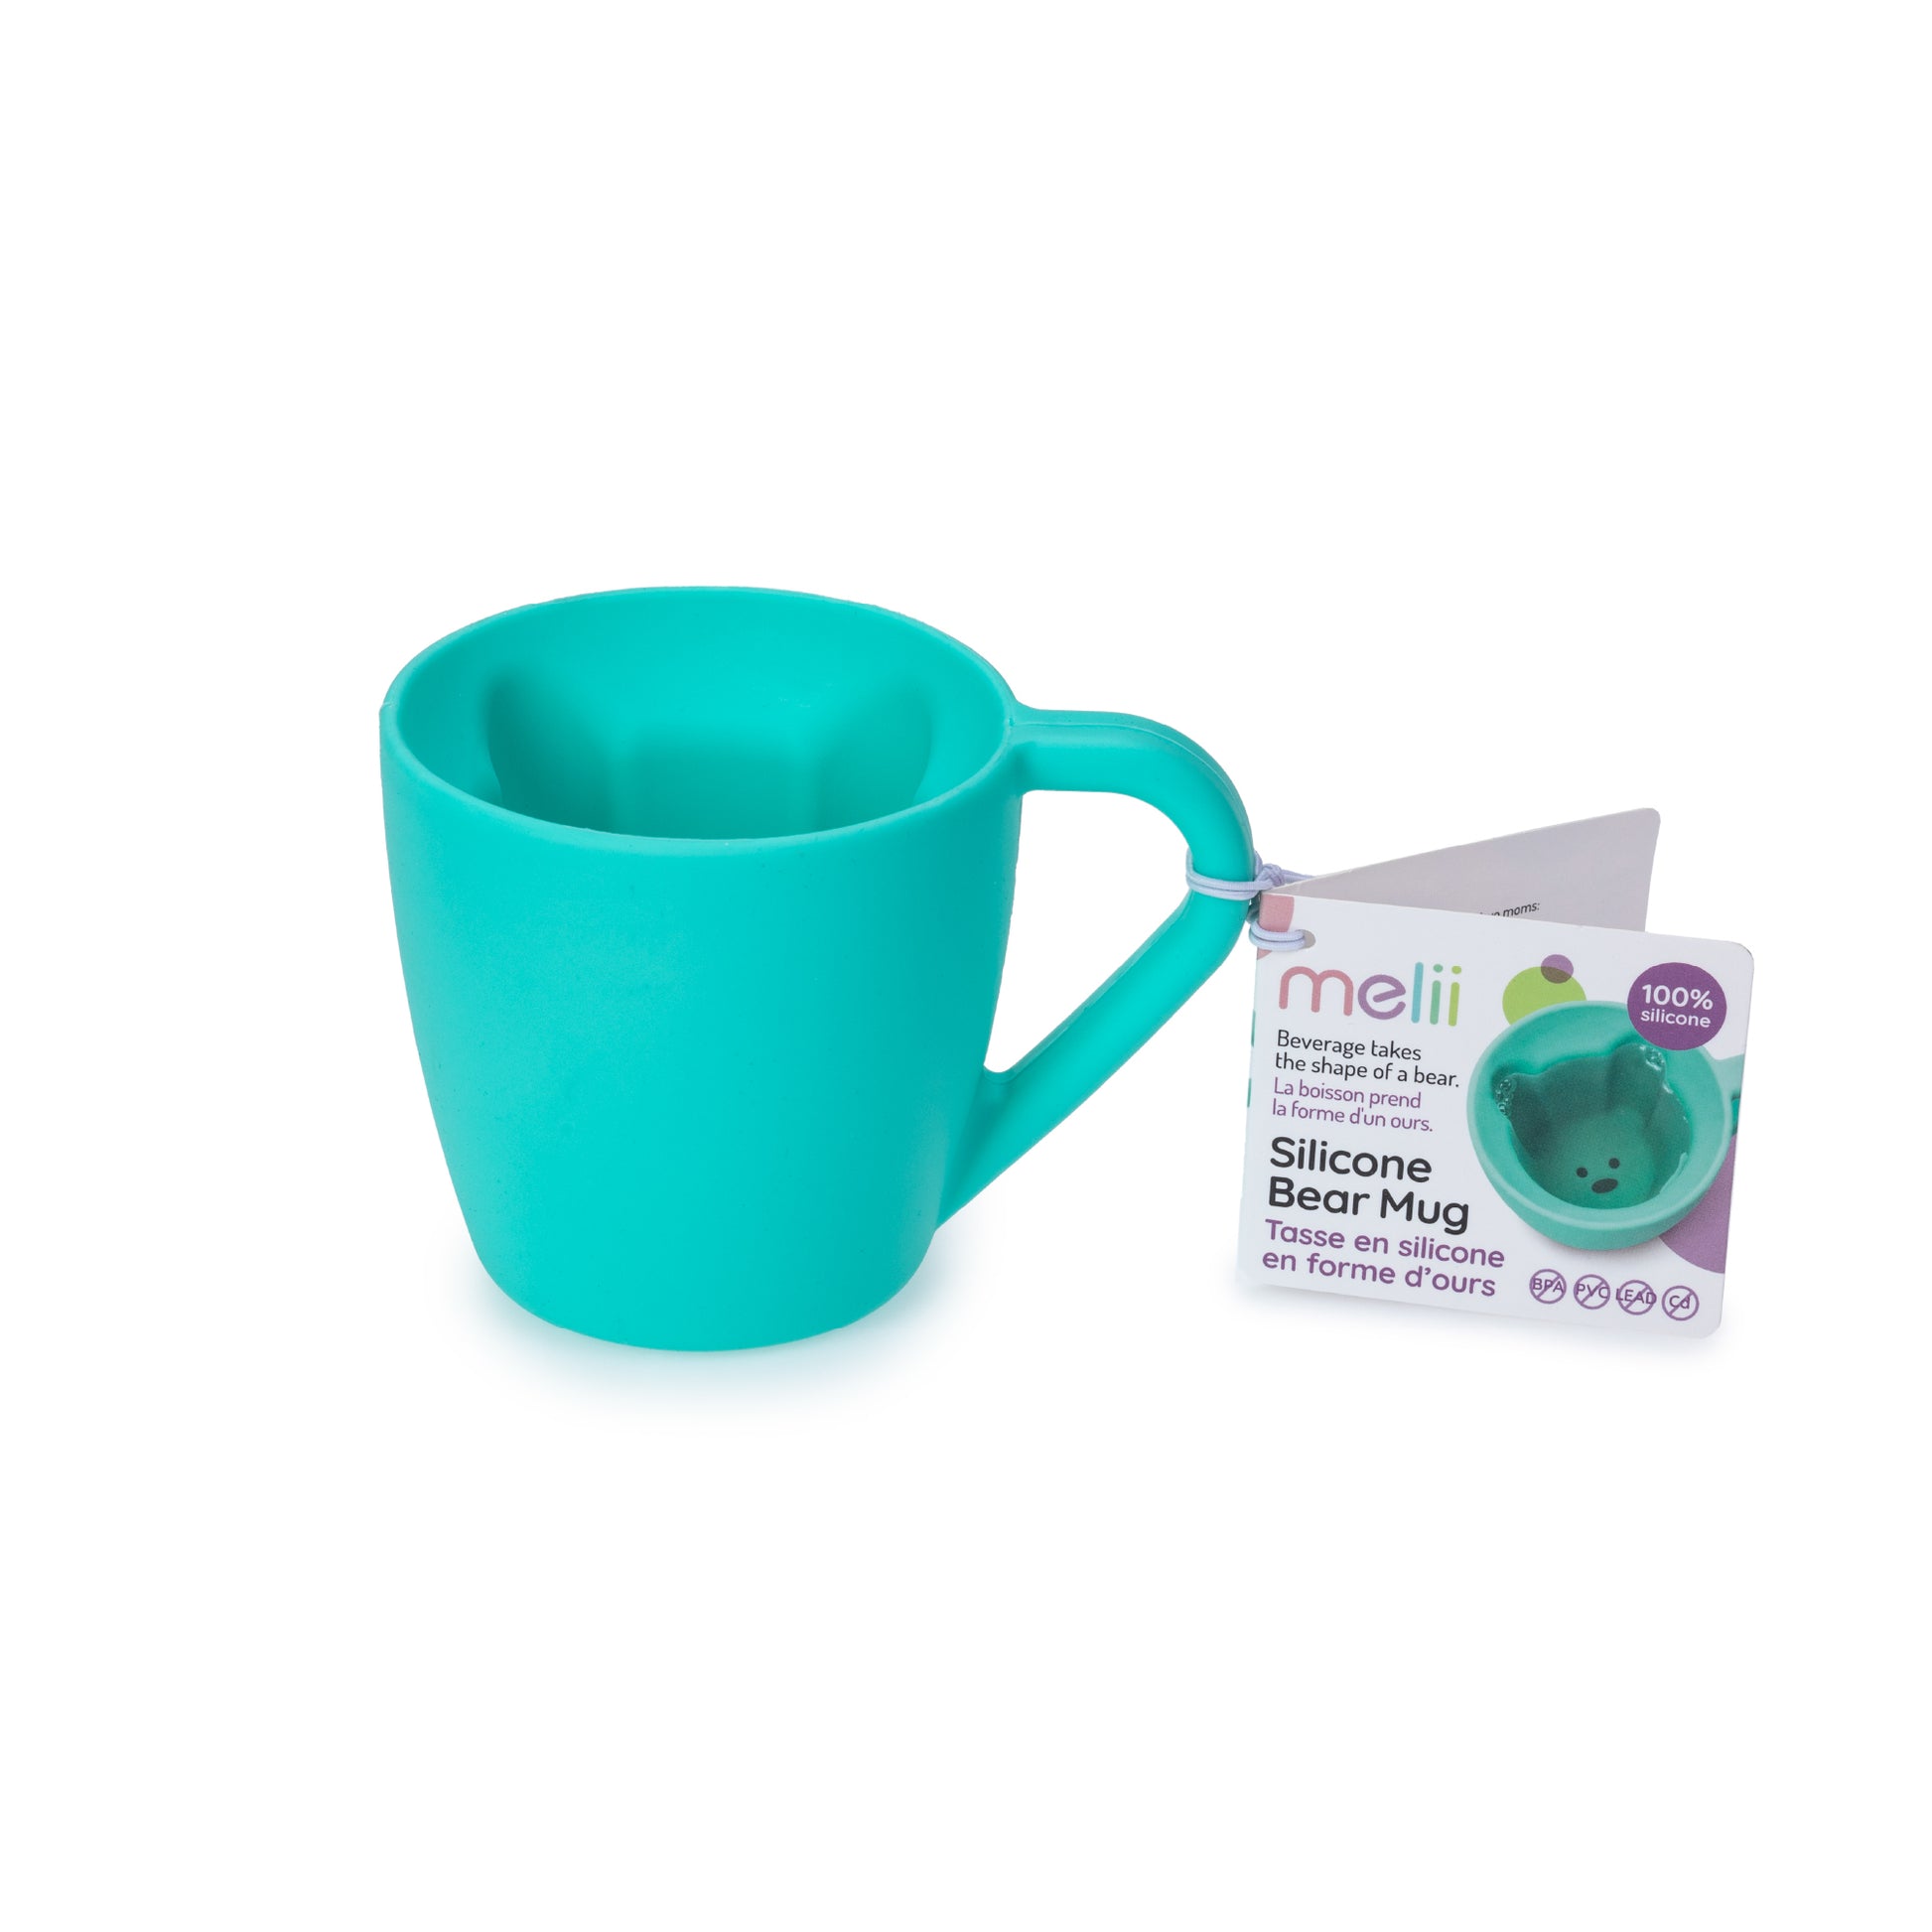 Melii Pretend Play Bear turquoise Mug for Kids - Imaginative Silicone Cup with Magical Bear-Shaped Beverage, Perfect for Hot and Cold Drinks - Durable, BPA-Free